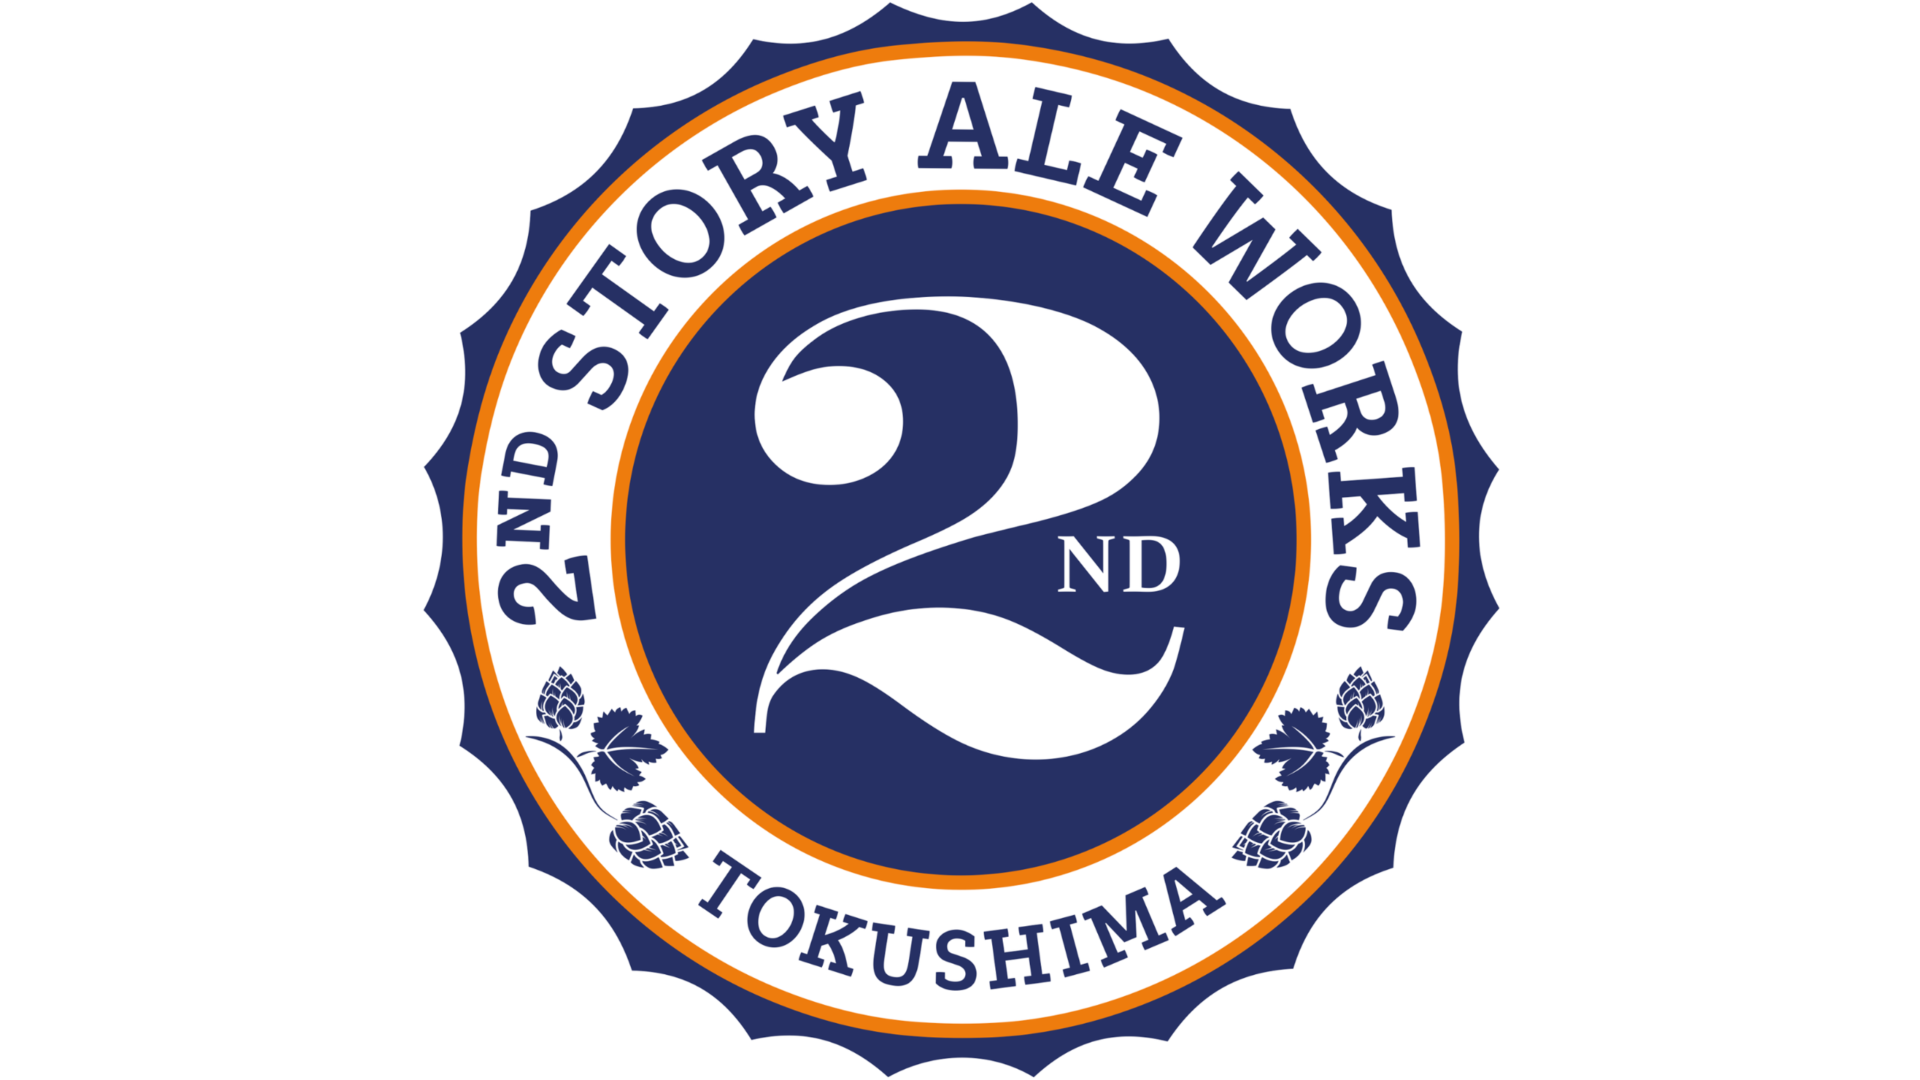 2nd Story Ale Works - 日本産ホップ推進委員会